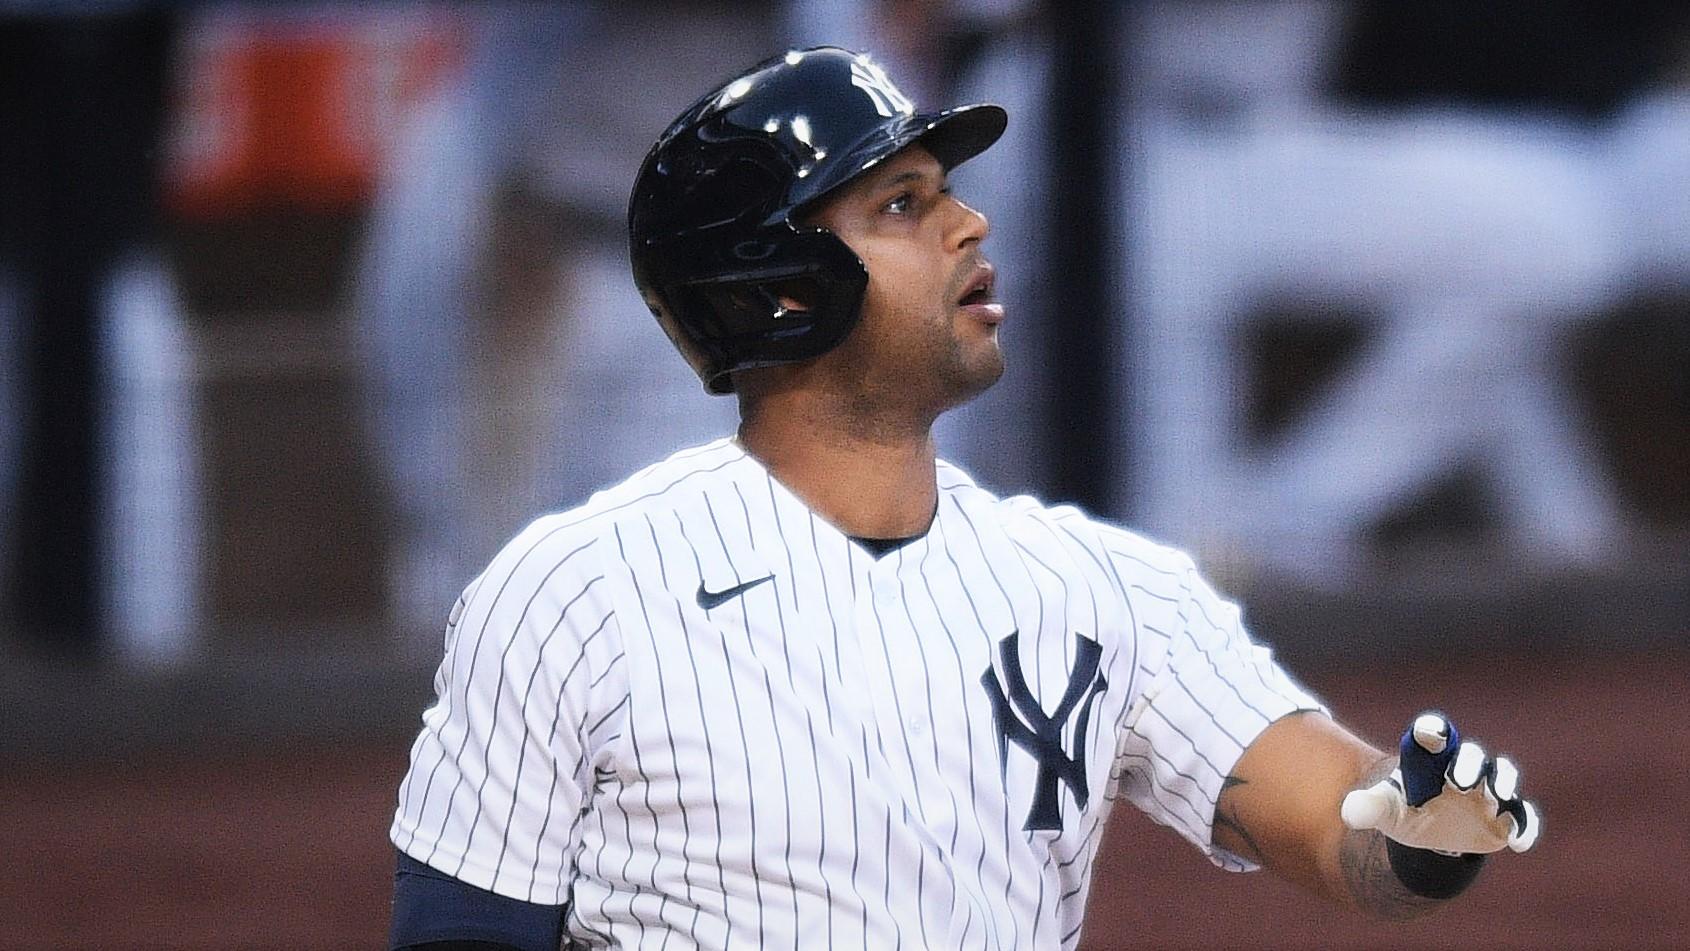 Oct 7, 2020; San Diego, California, USA; New York Yankees center fielder Aaron Hicks (31) hits an RBI double against the Tampa Bay Rays in the fifth inning during game three of the 2020 ALDS at Petco Park. Mandatory Credit: Orlando Ramirez-USA TODAY Sports / © Orlando Ramirez-USA TODAY Sports